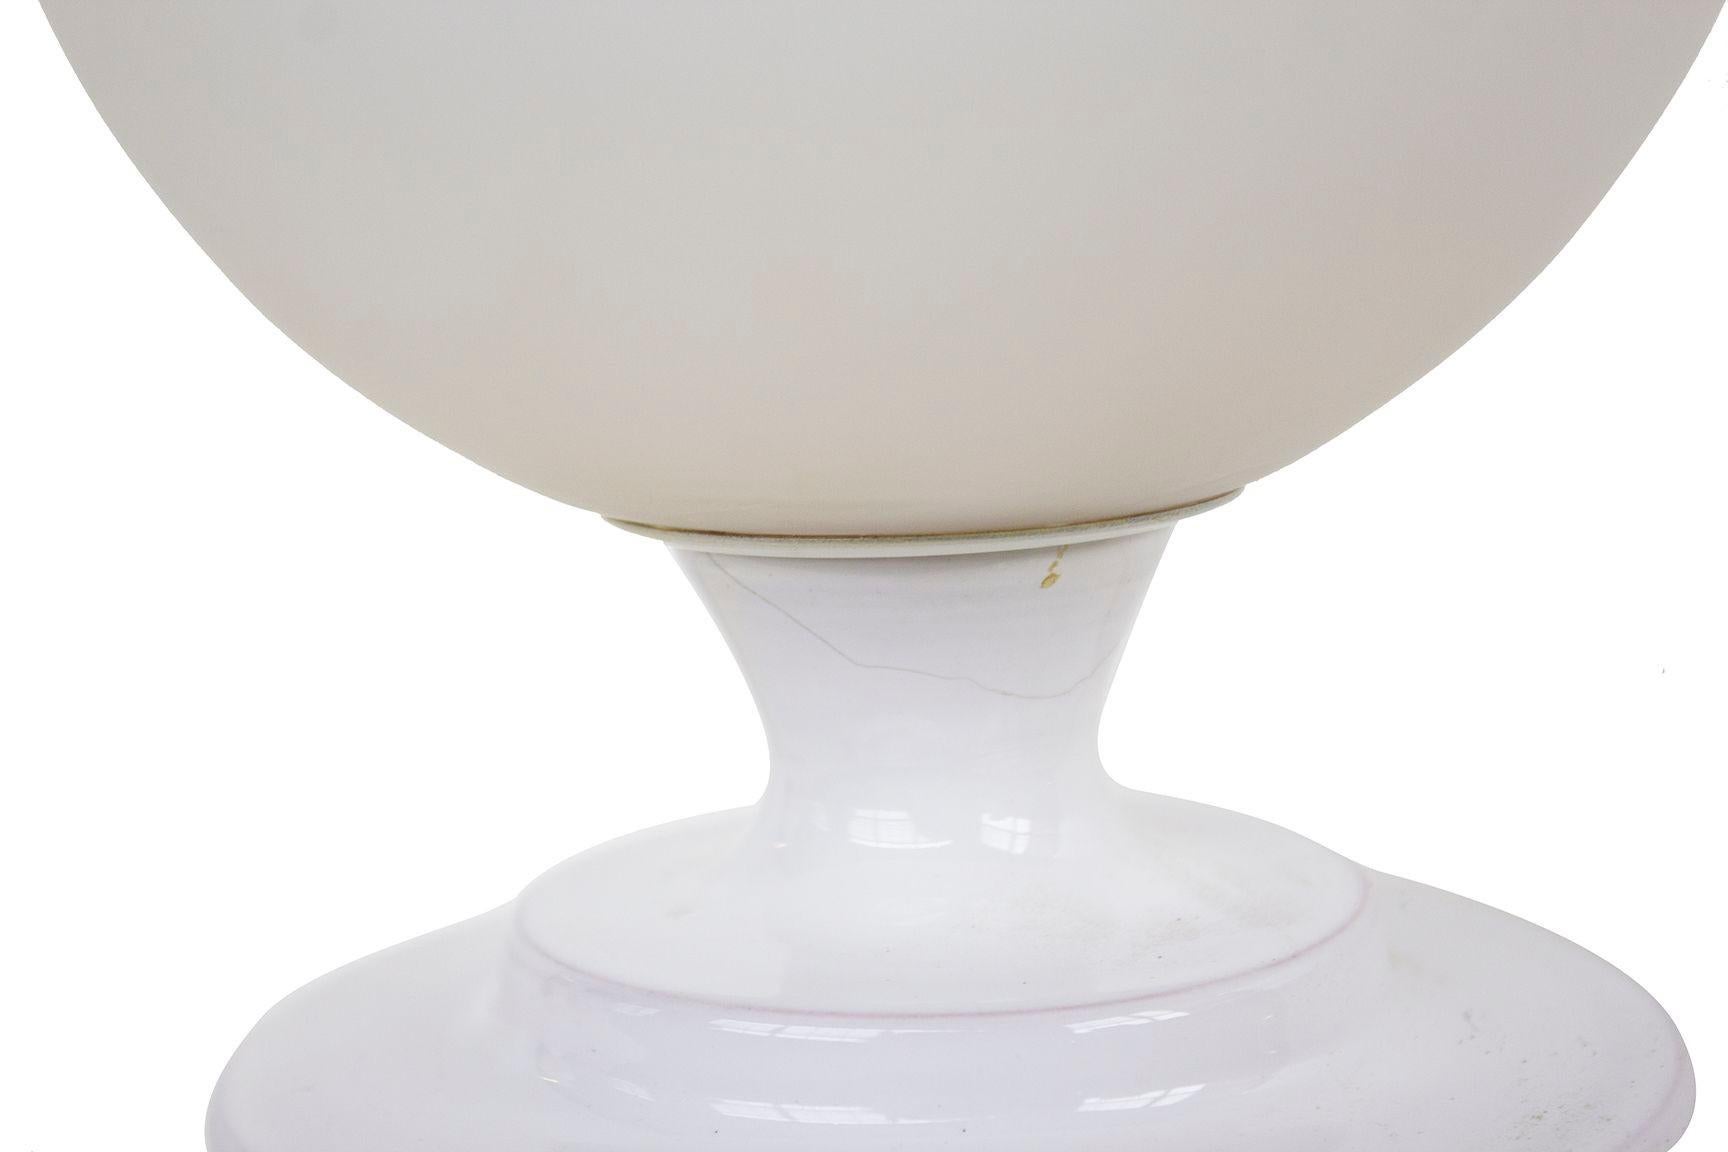 Mid-20th Century Italian Globe Table or Desk Lamp in White Ceramic and Glass For Sale